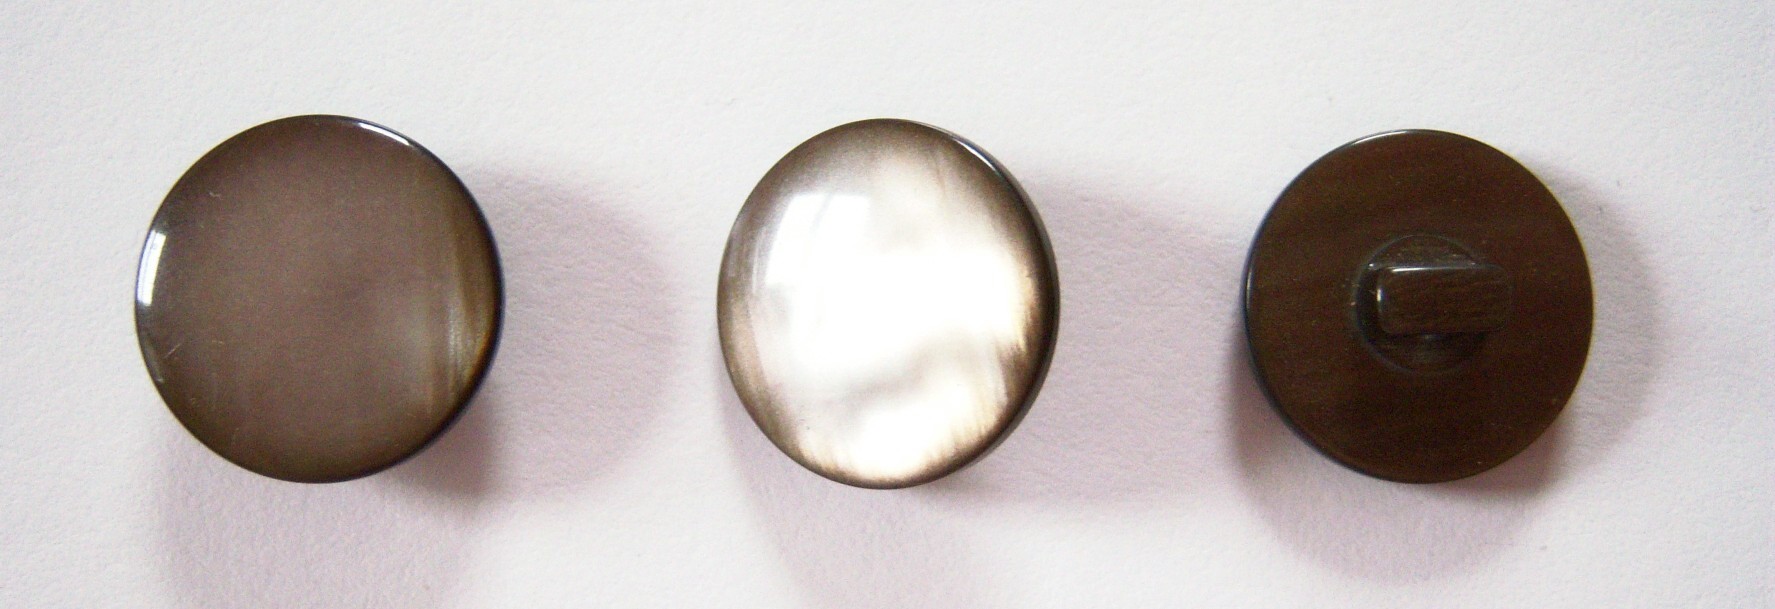 Brown Pearlized 11/16" Button